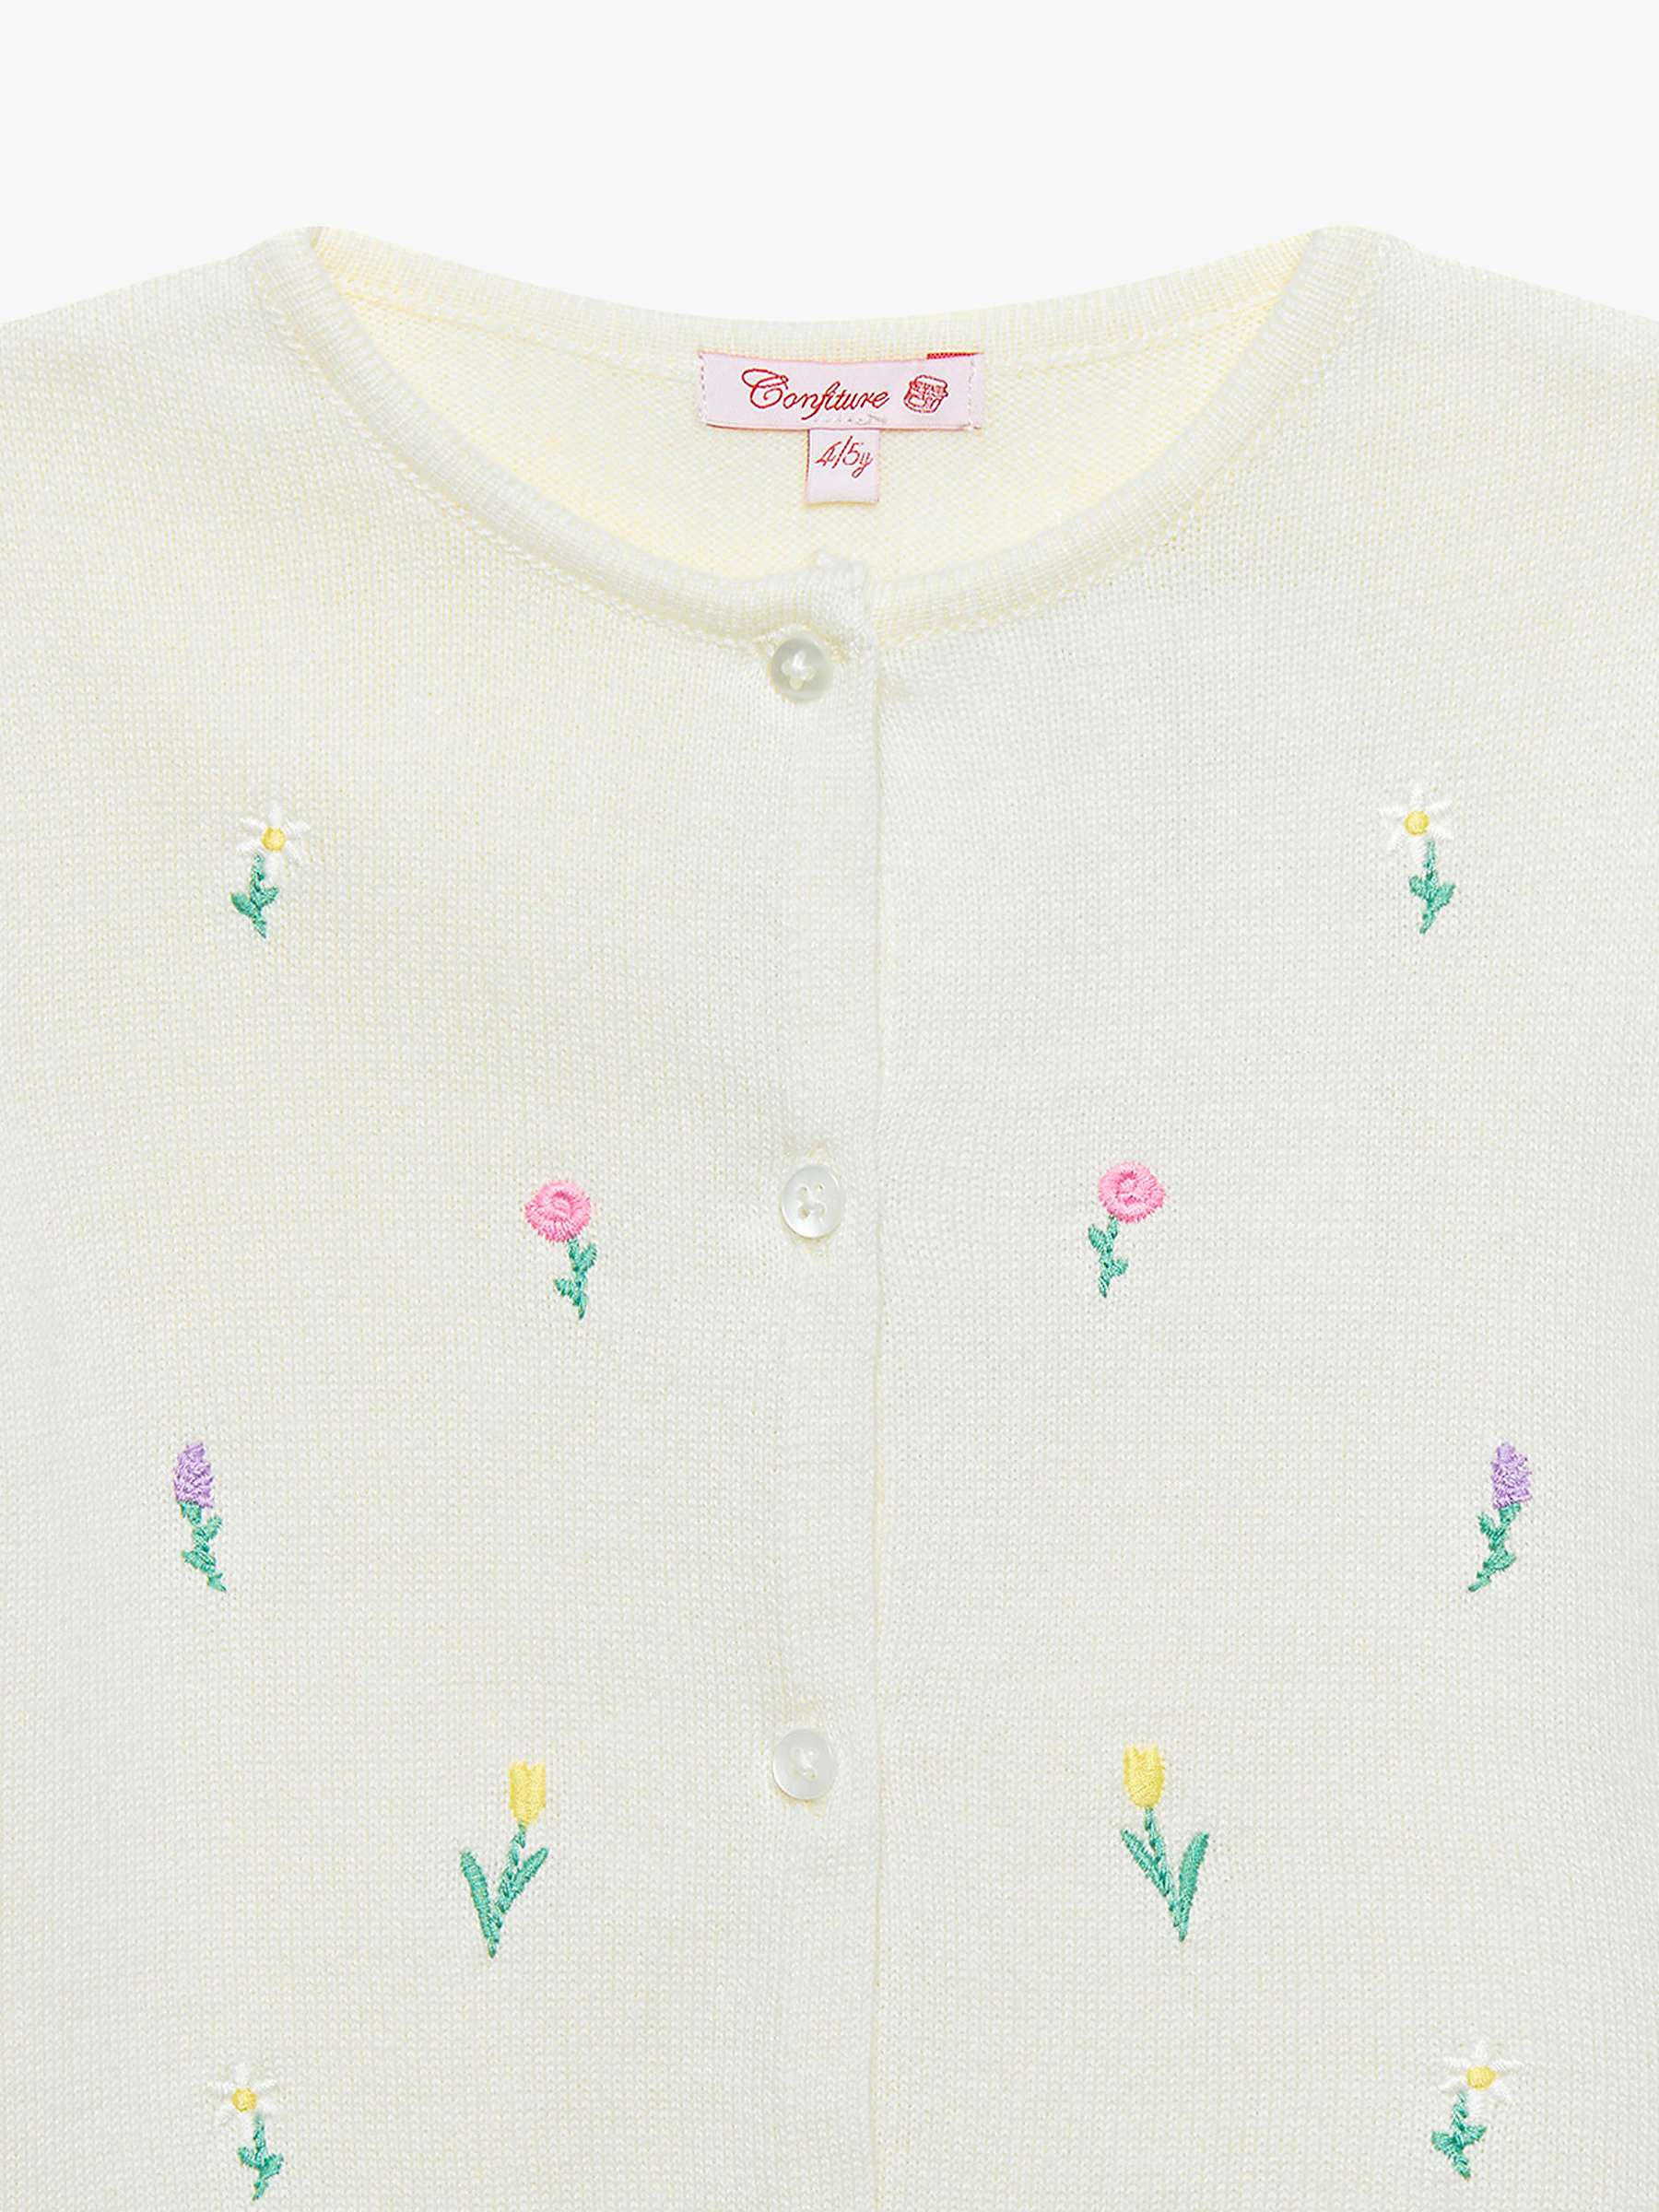 Buy Trotters Baby Pretty Floral Cardigan, Ivory Online at johnlewis.com